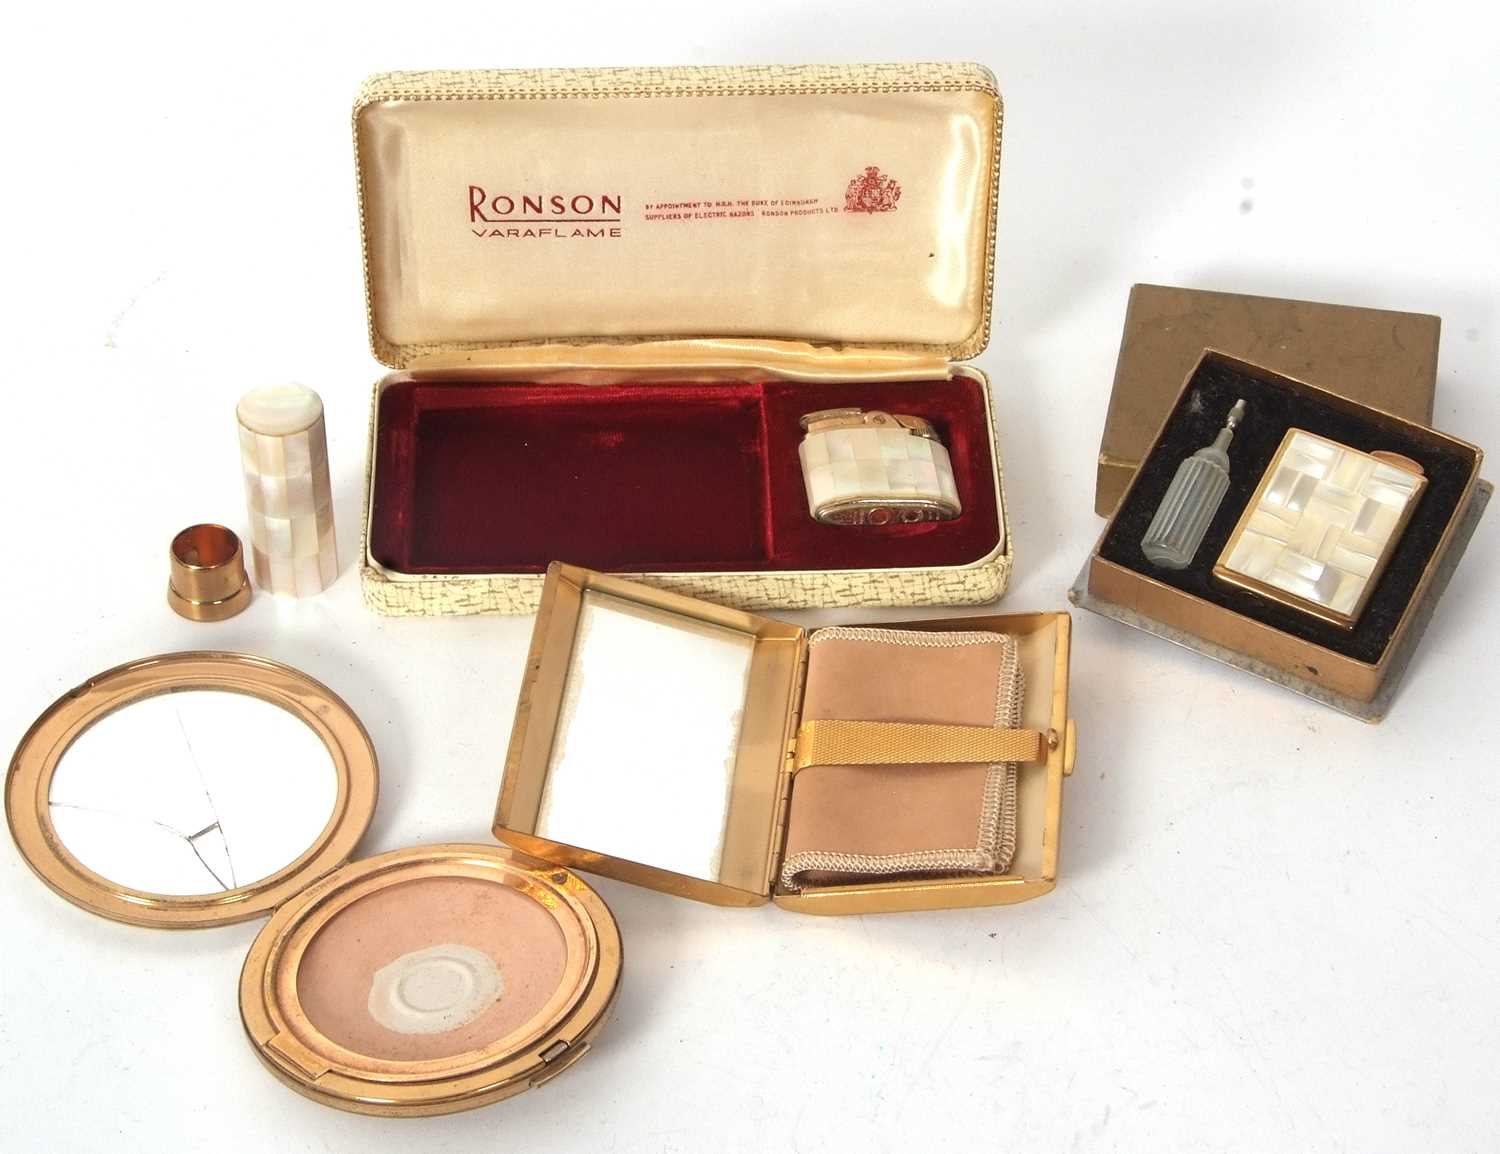 Mixed Lot: Vintage cased Ronson boxed set with mother of pearl lighter and compact, together with - Image 3 of 5